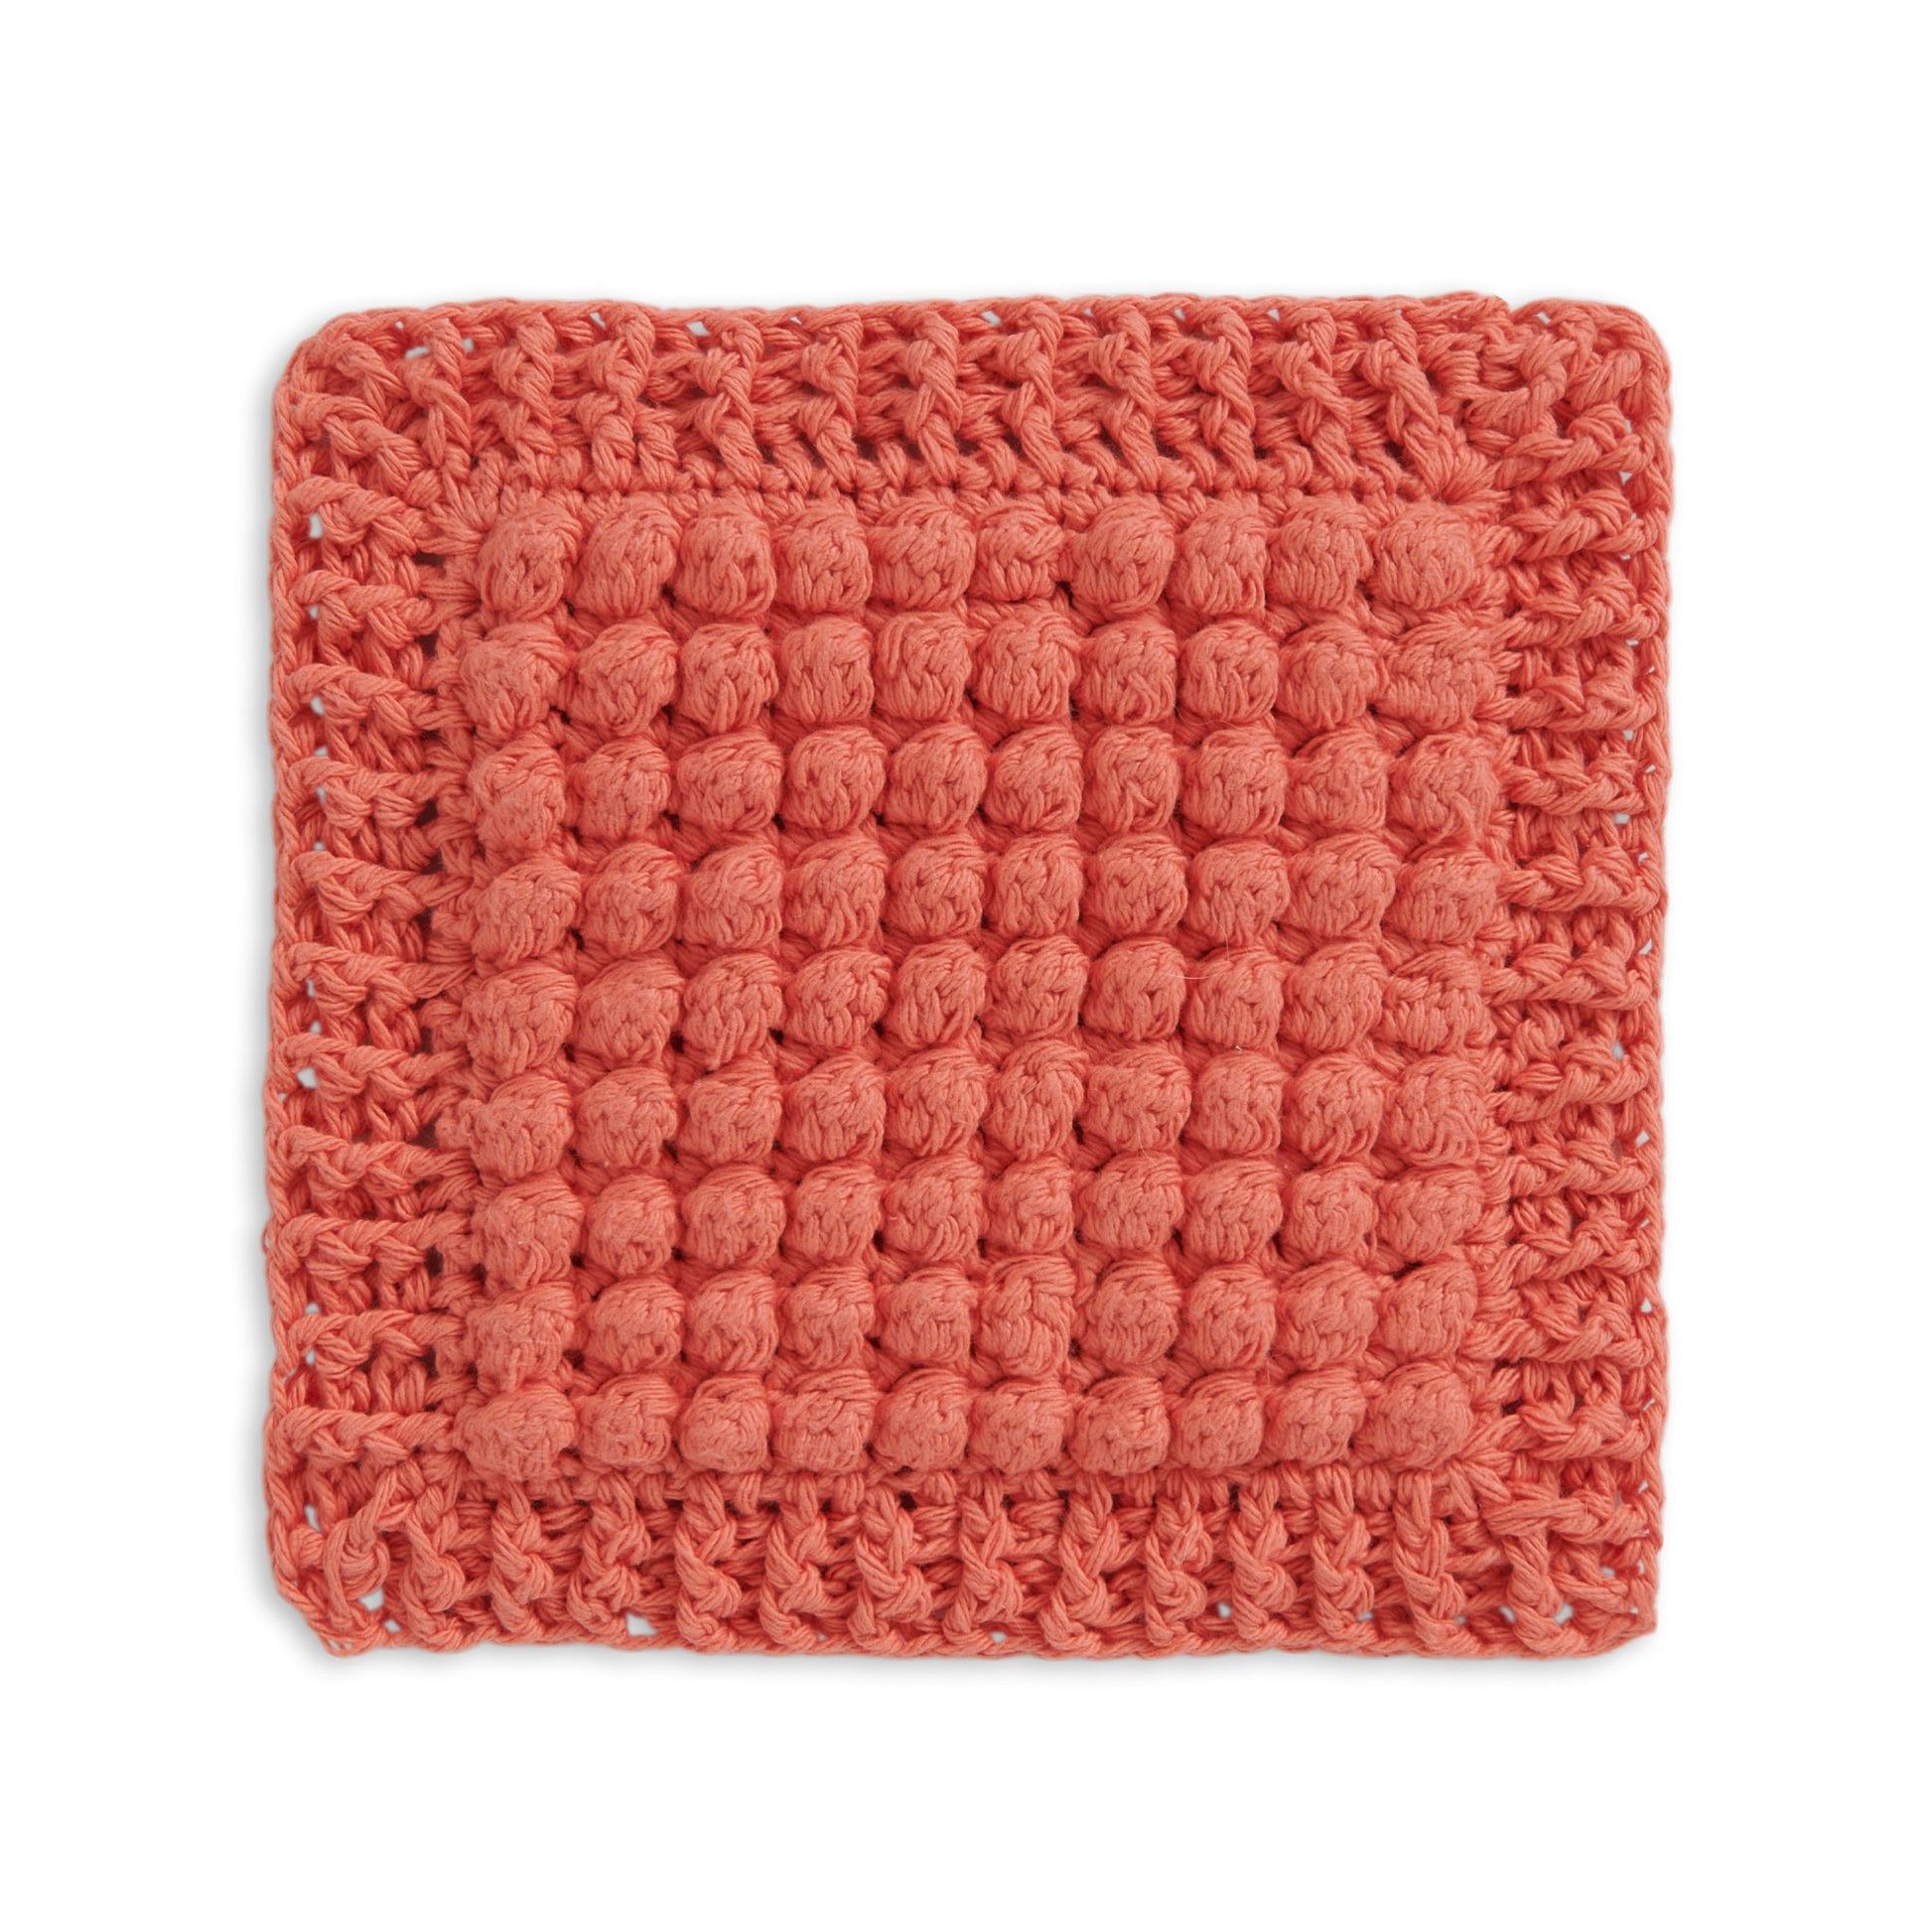 Free Lily Fall Colors Textured Crochet Hot Pads Pattern